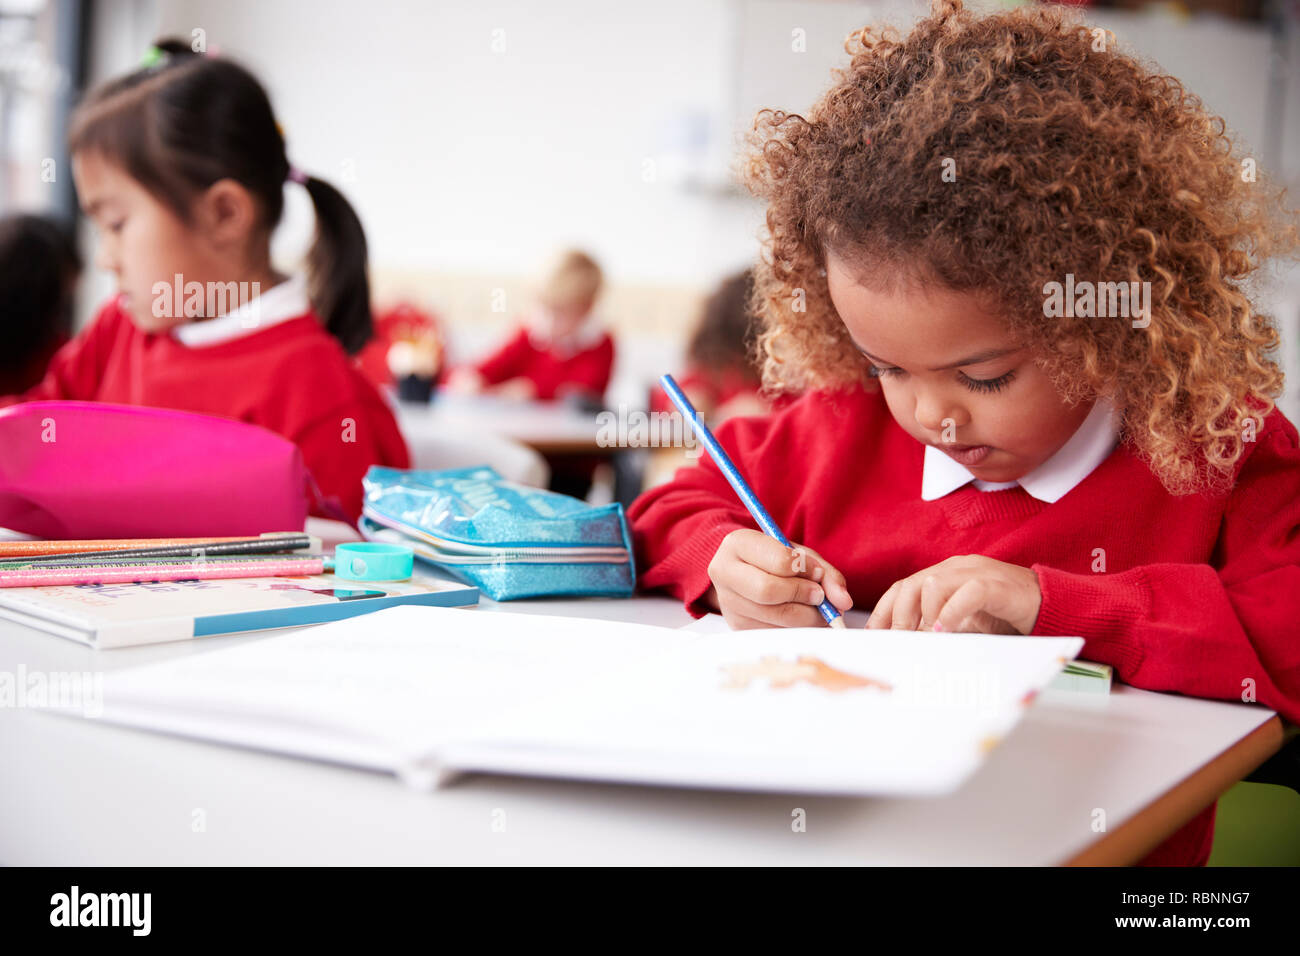 Mixed race schoolgirl wearing school uniform sitting at a desk in an infant school classroom drawing, close up Stock Photo